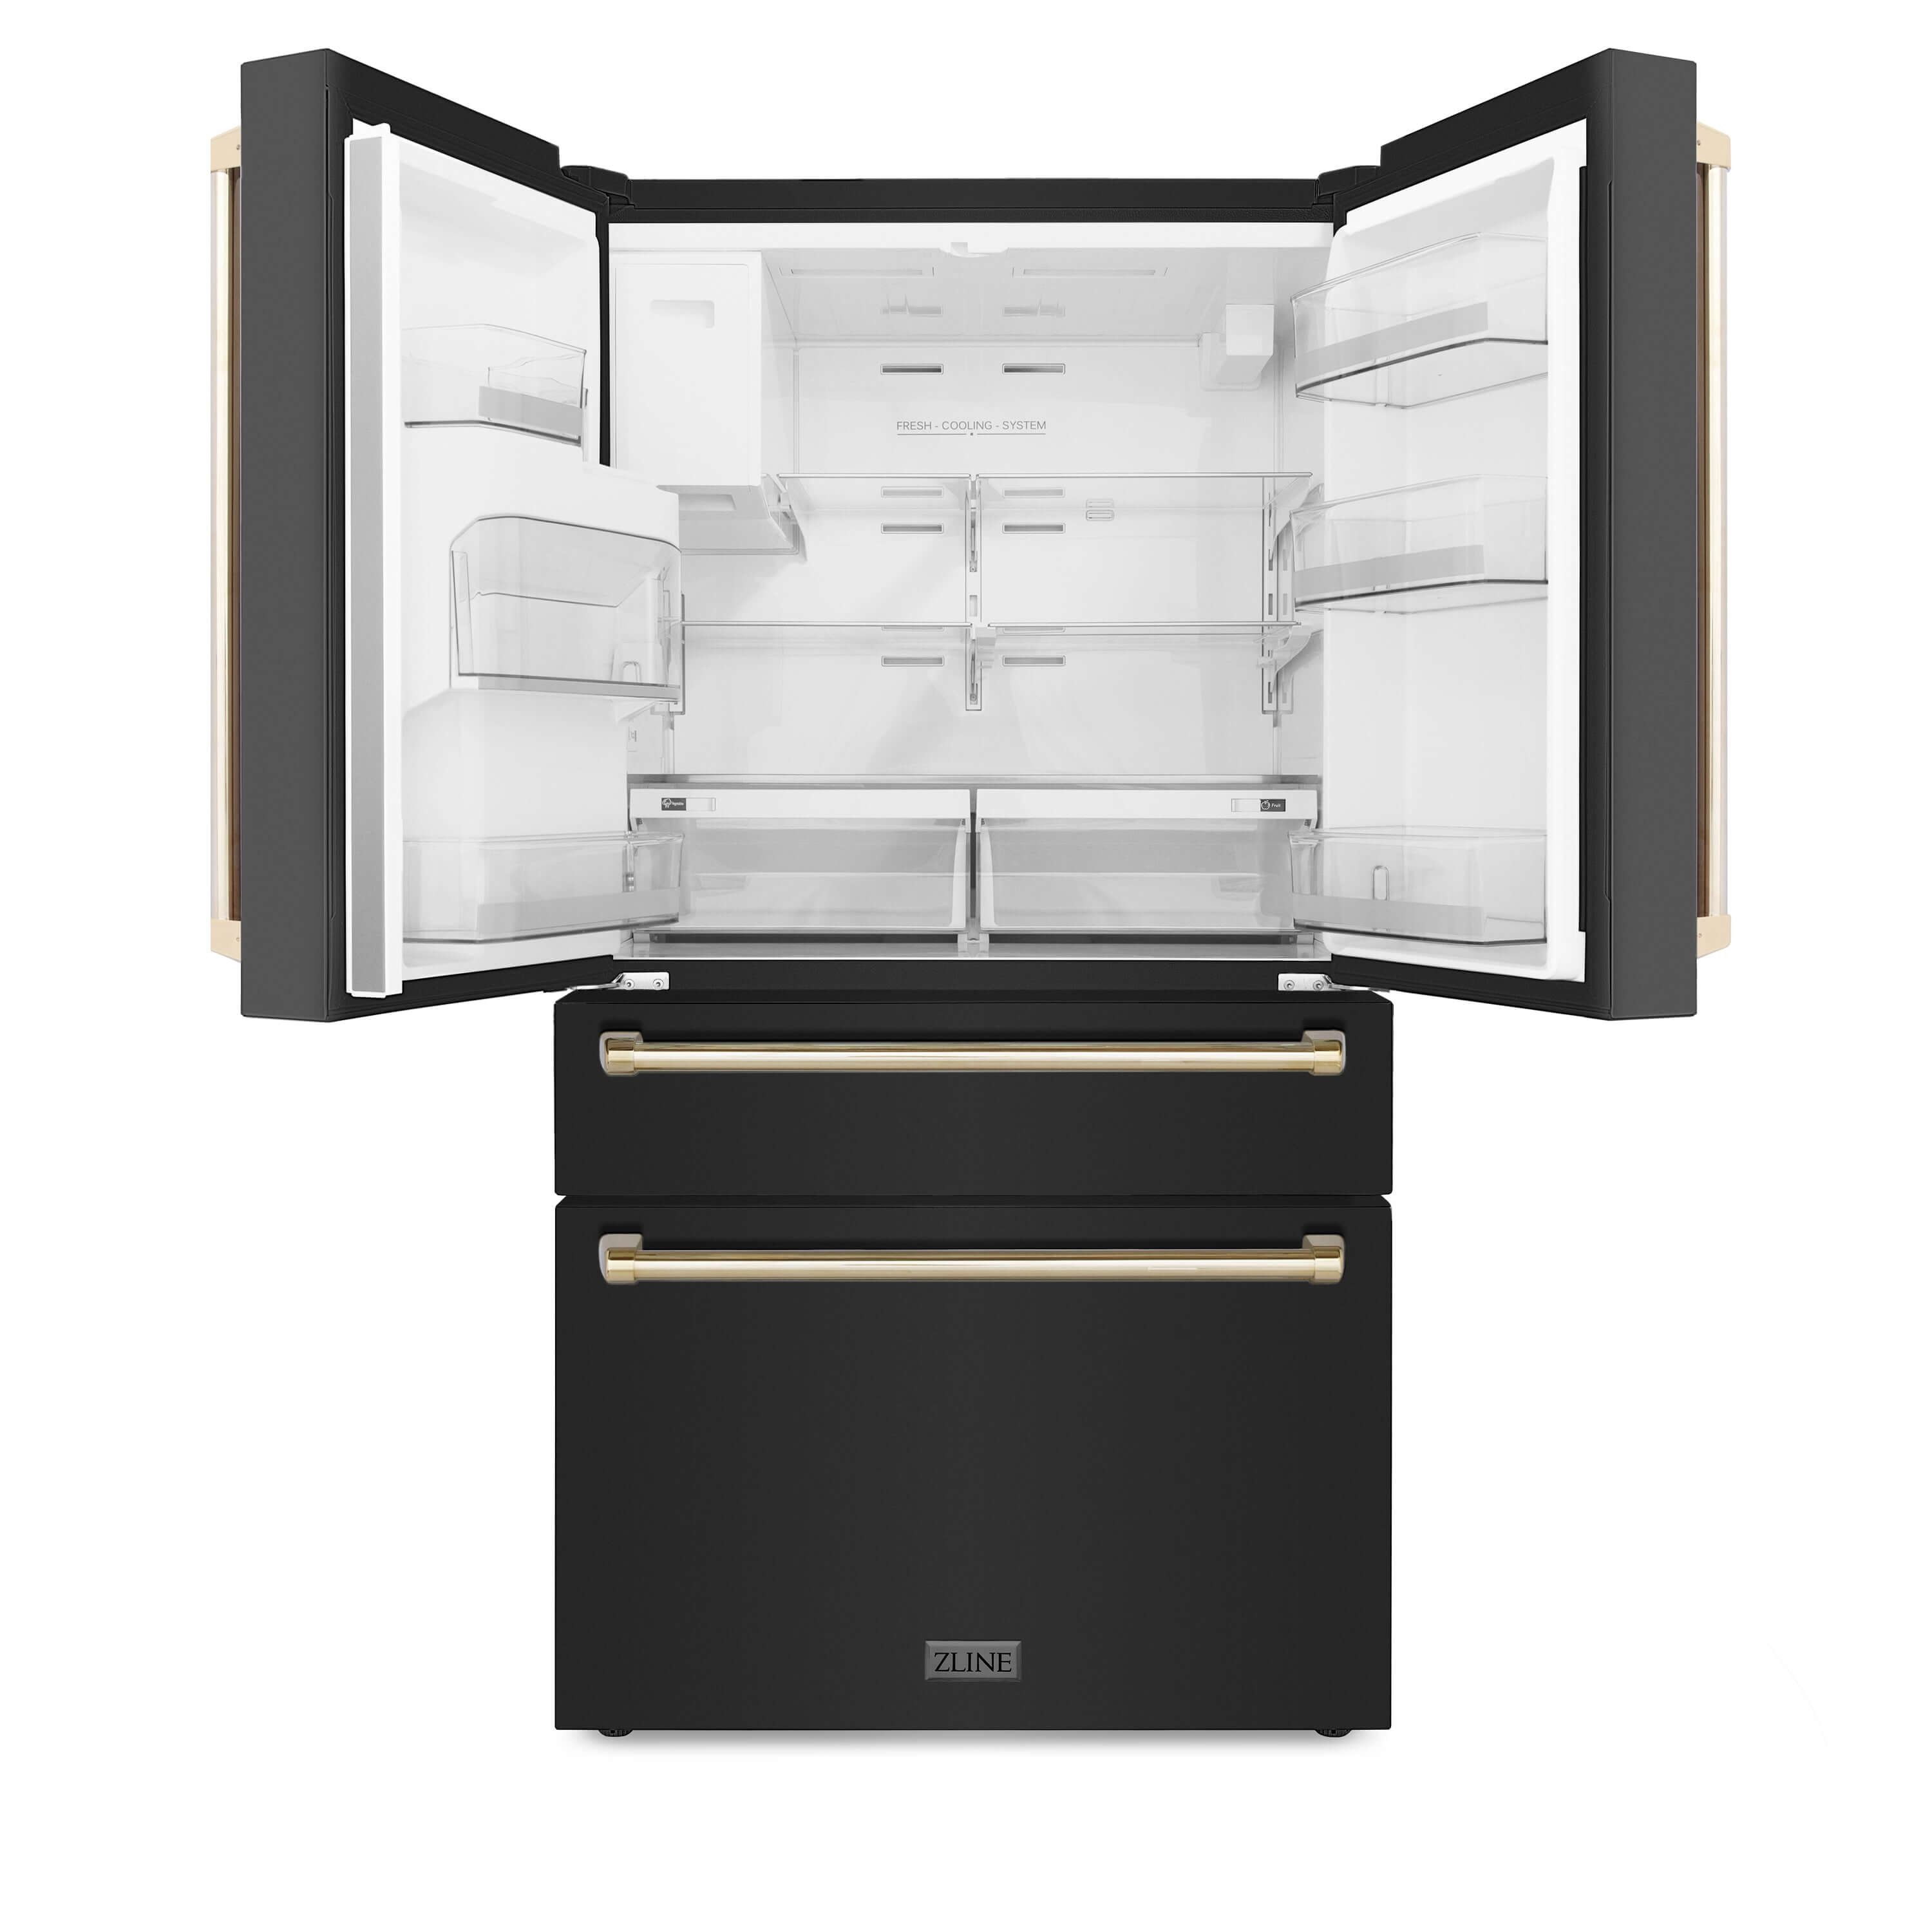 ZLINE Autograph Edition 36" French Door Refrigerator in Black Stainless Steel with Polished Gold accent handles front with doors and drawers open.